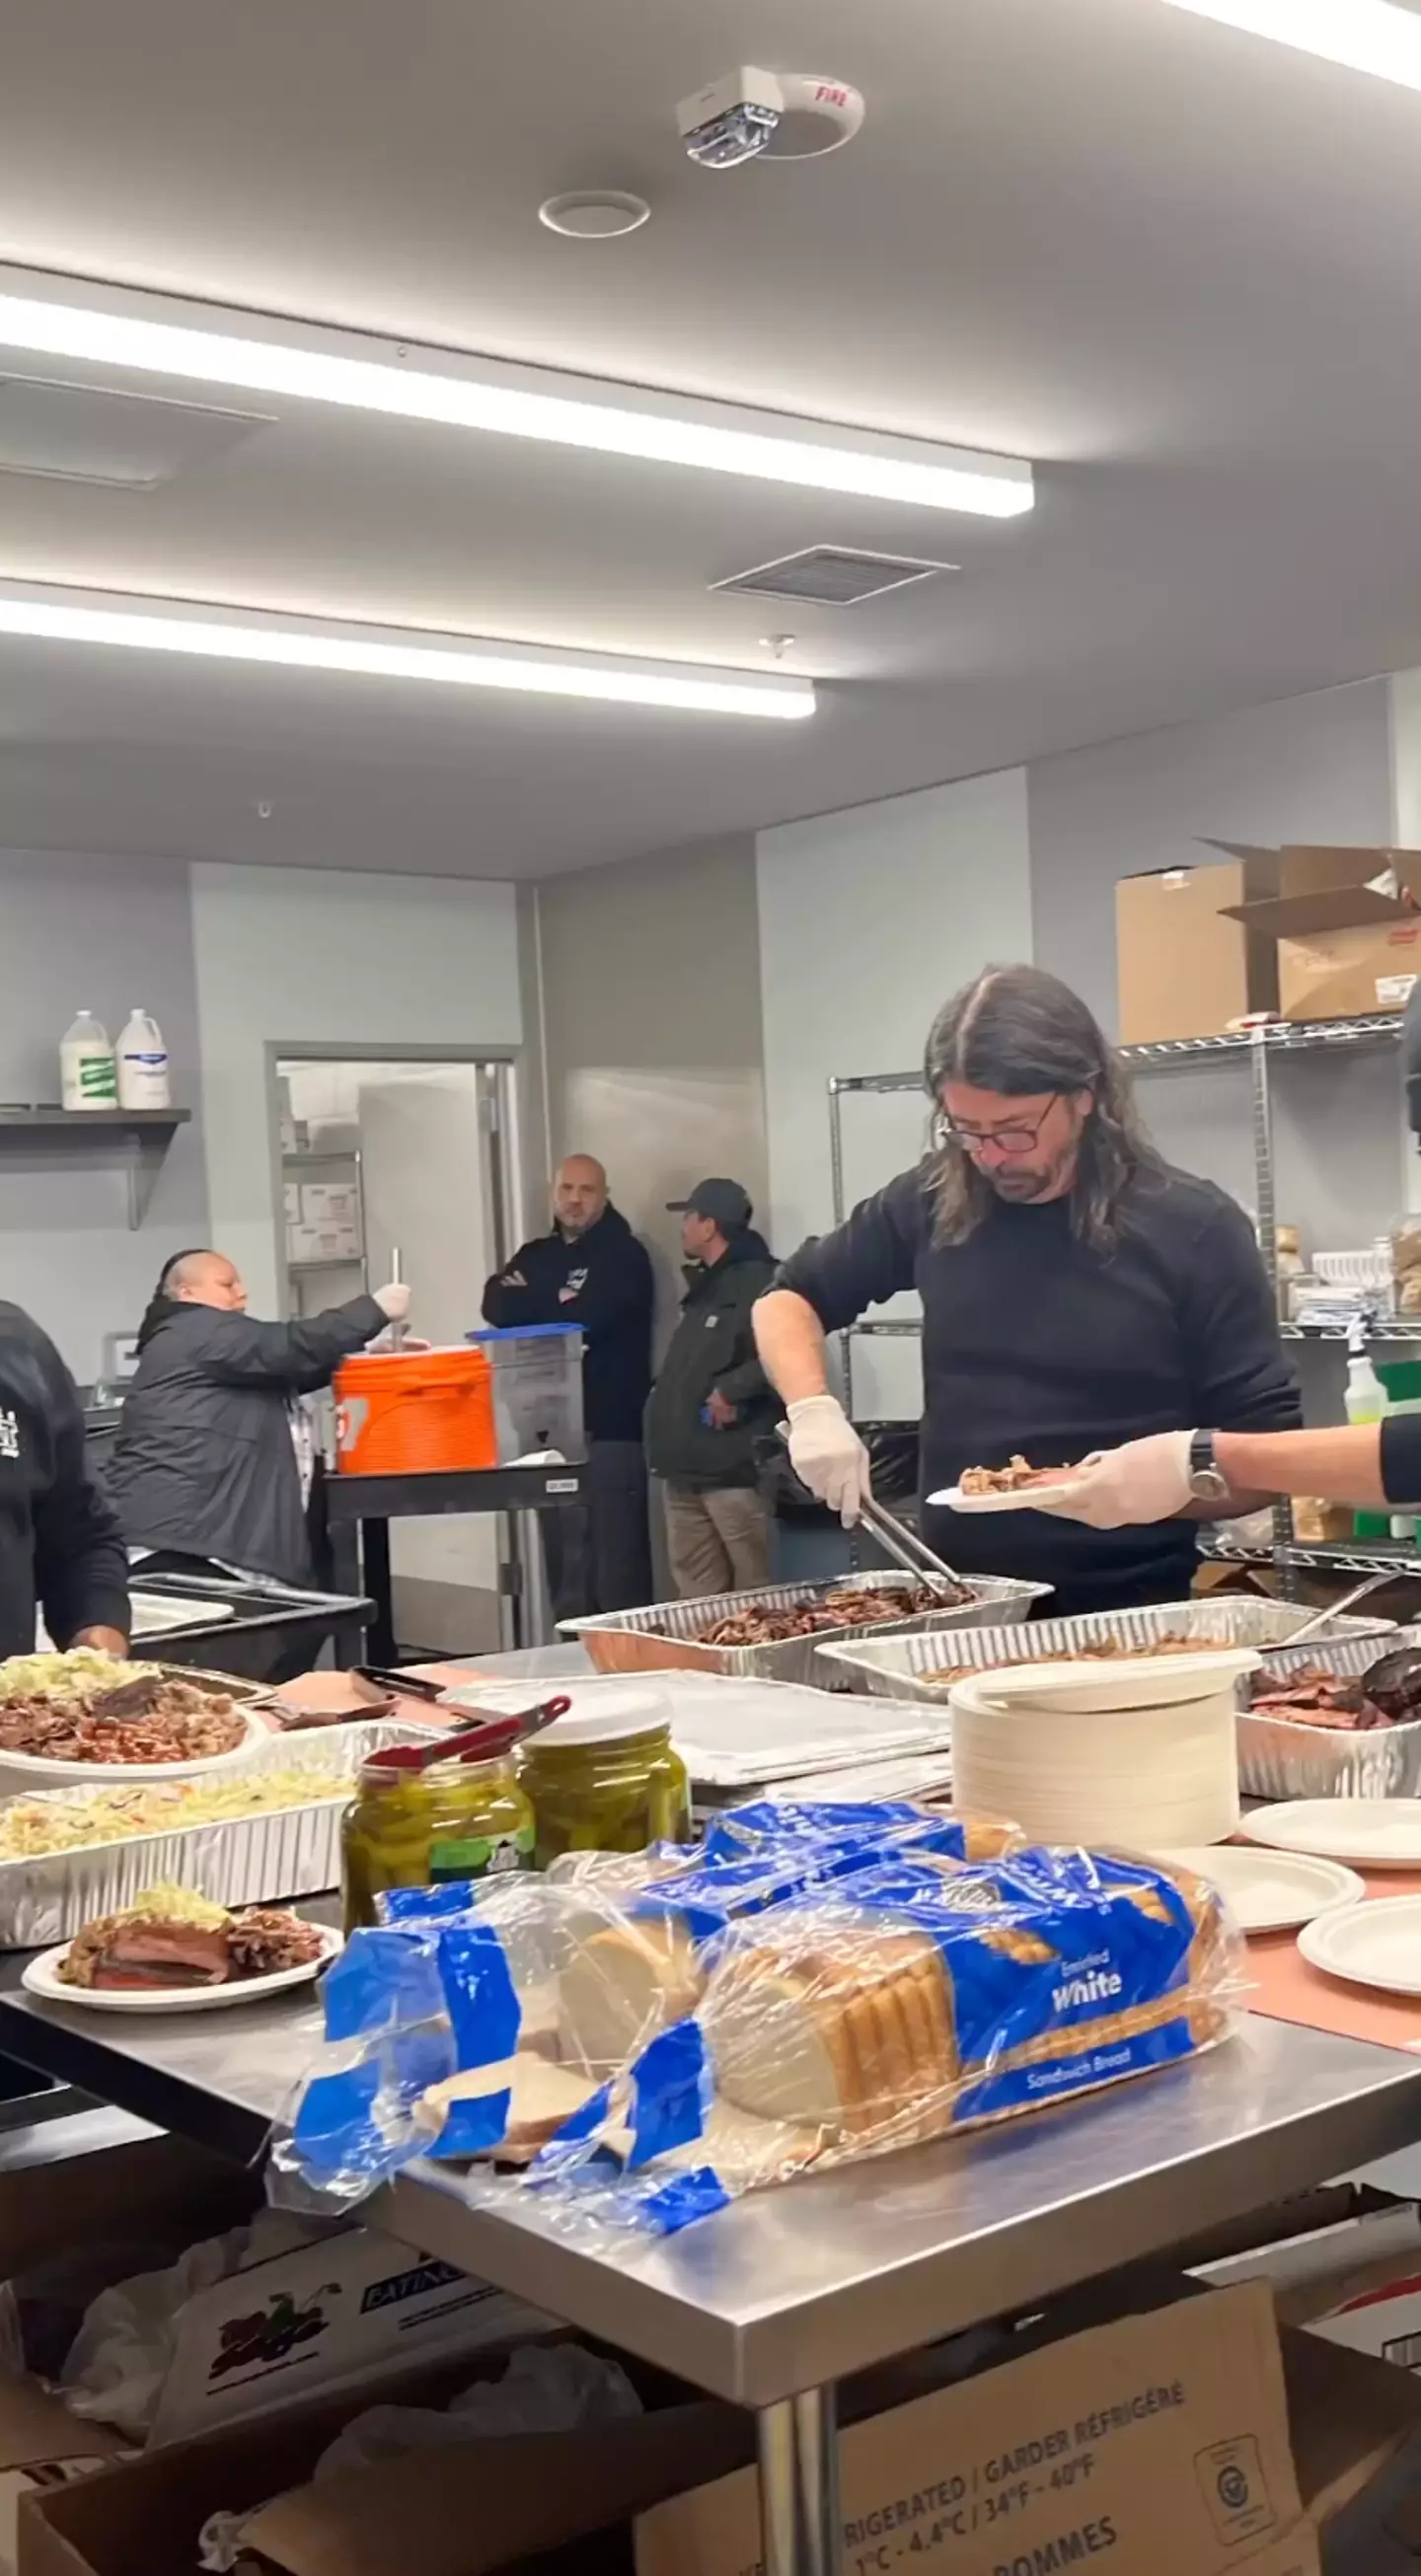 The feast helped to feed nearly 500 homeless people.